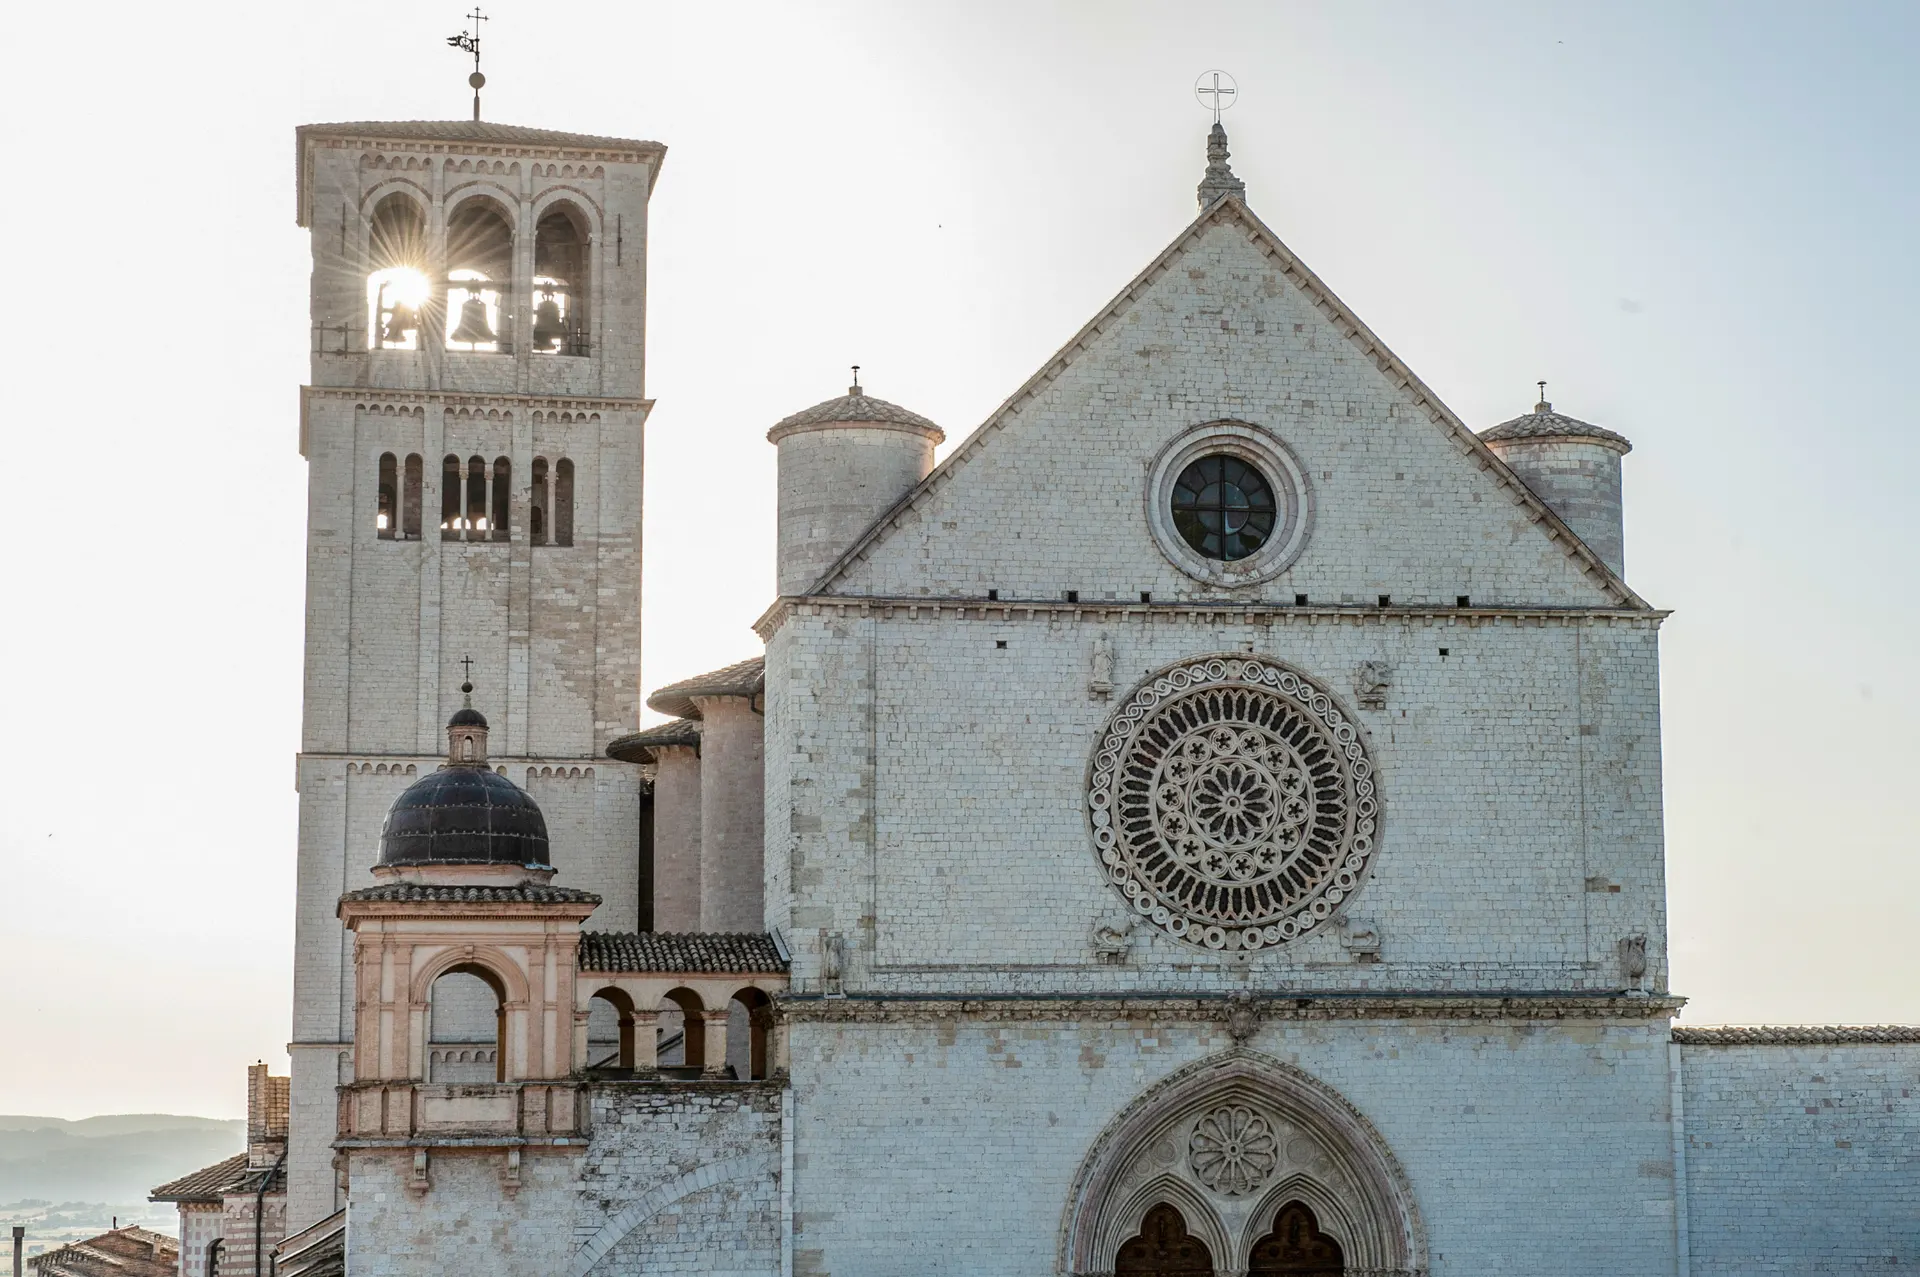 Basilica of San Francesco d'Assisi - Things to Do and See in Umbria